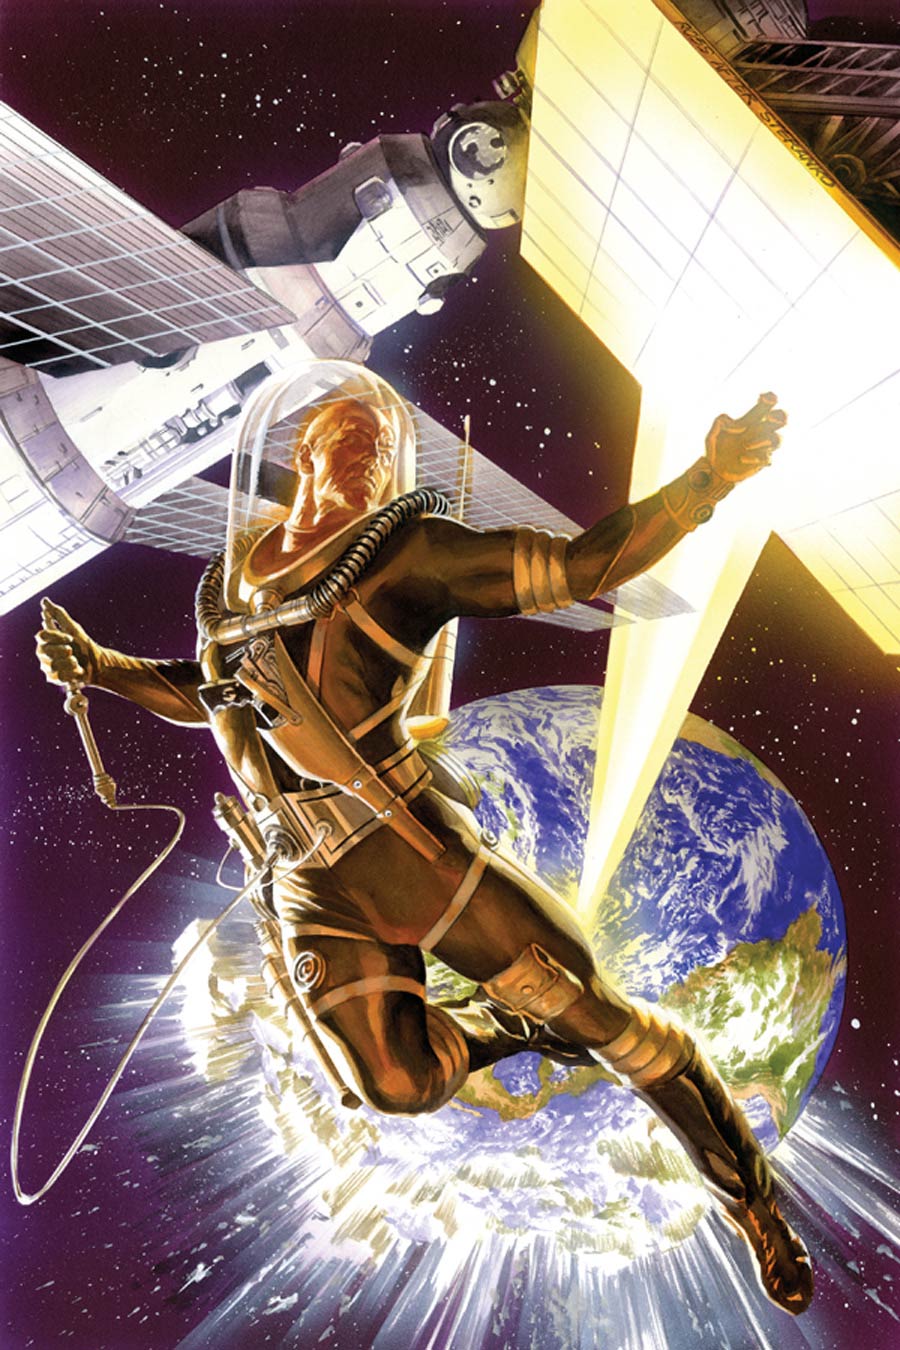 Doc Savage Vol 5 #5 Cover C High-End Alex Ross Virgin Art Ultra-Limited Variant Cover (ONLY 50 COPIES IN EXISTENCE!)